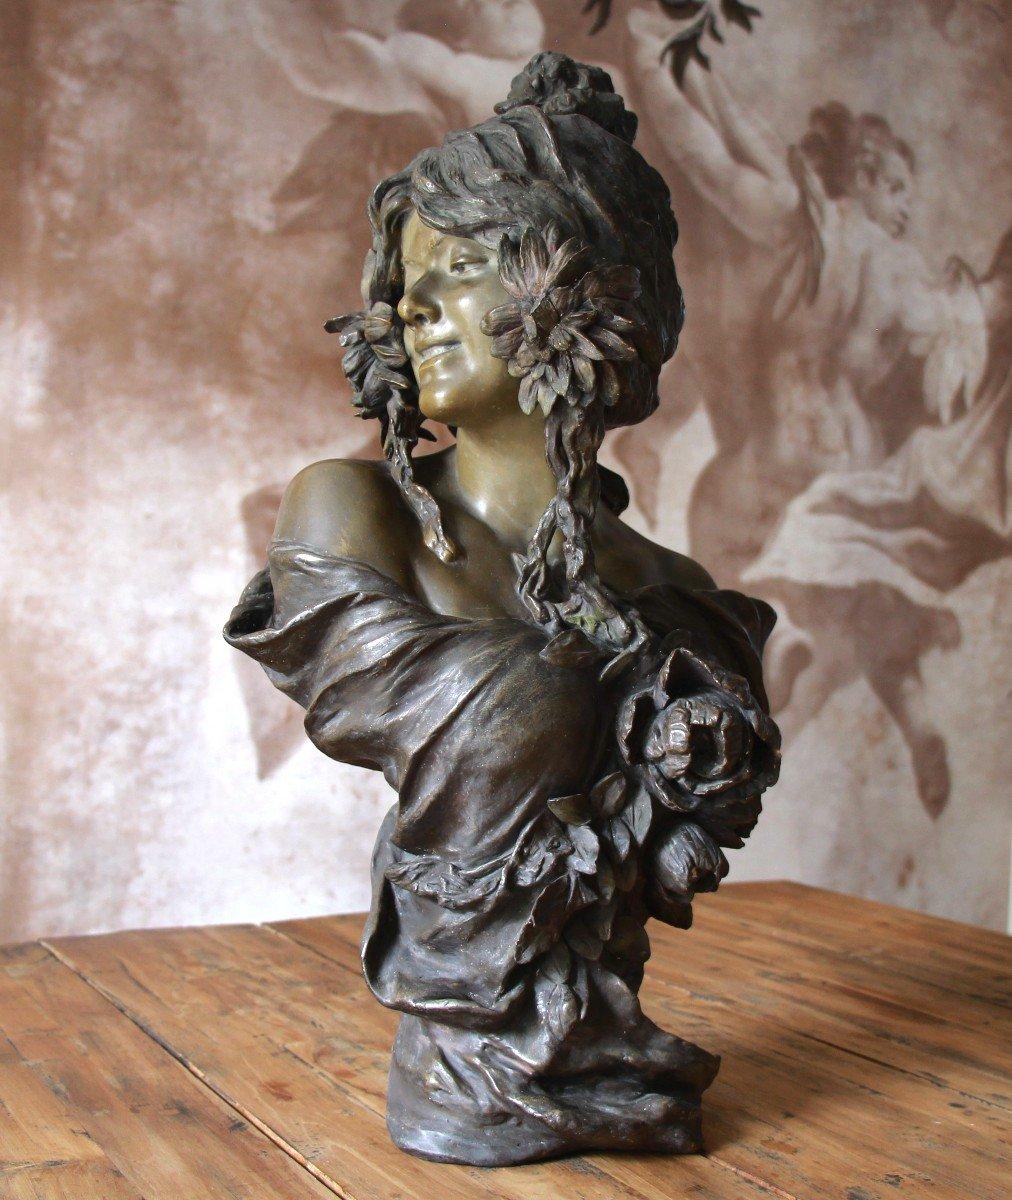 Terracotta bust of a young girl, the color mimicking the shadow of bronze sculptures,
a feature that established the fame of the Friederich Goldscheider ceramic manufactory in Vienna at the turn of the century,
when the sculpture was